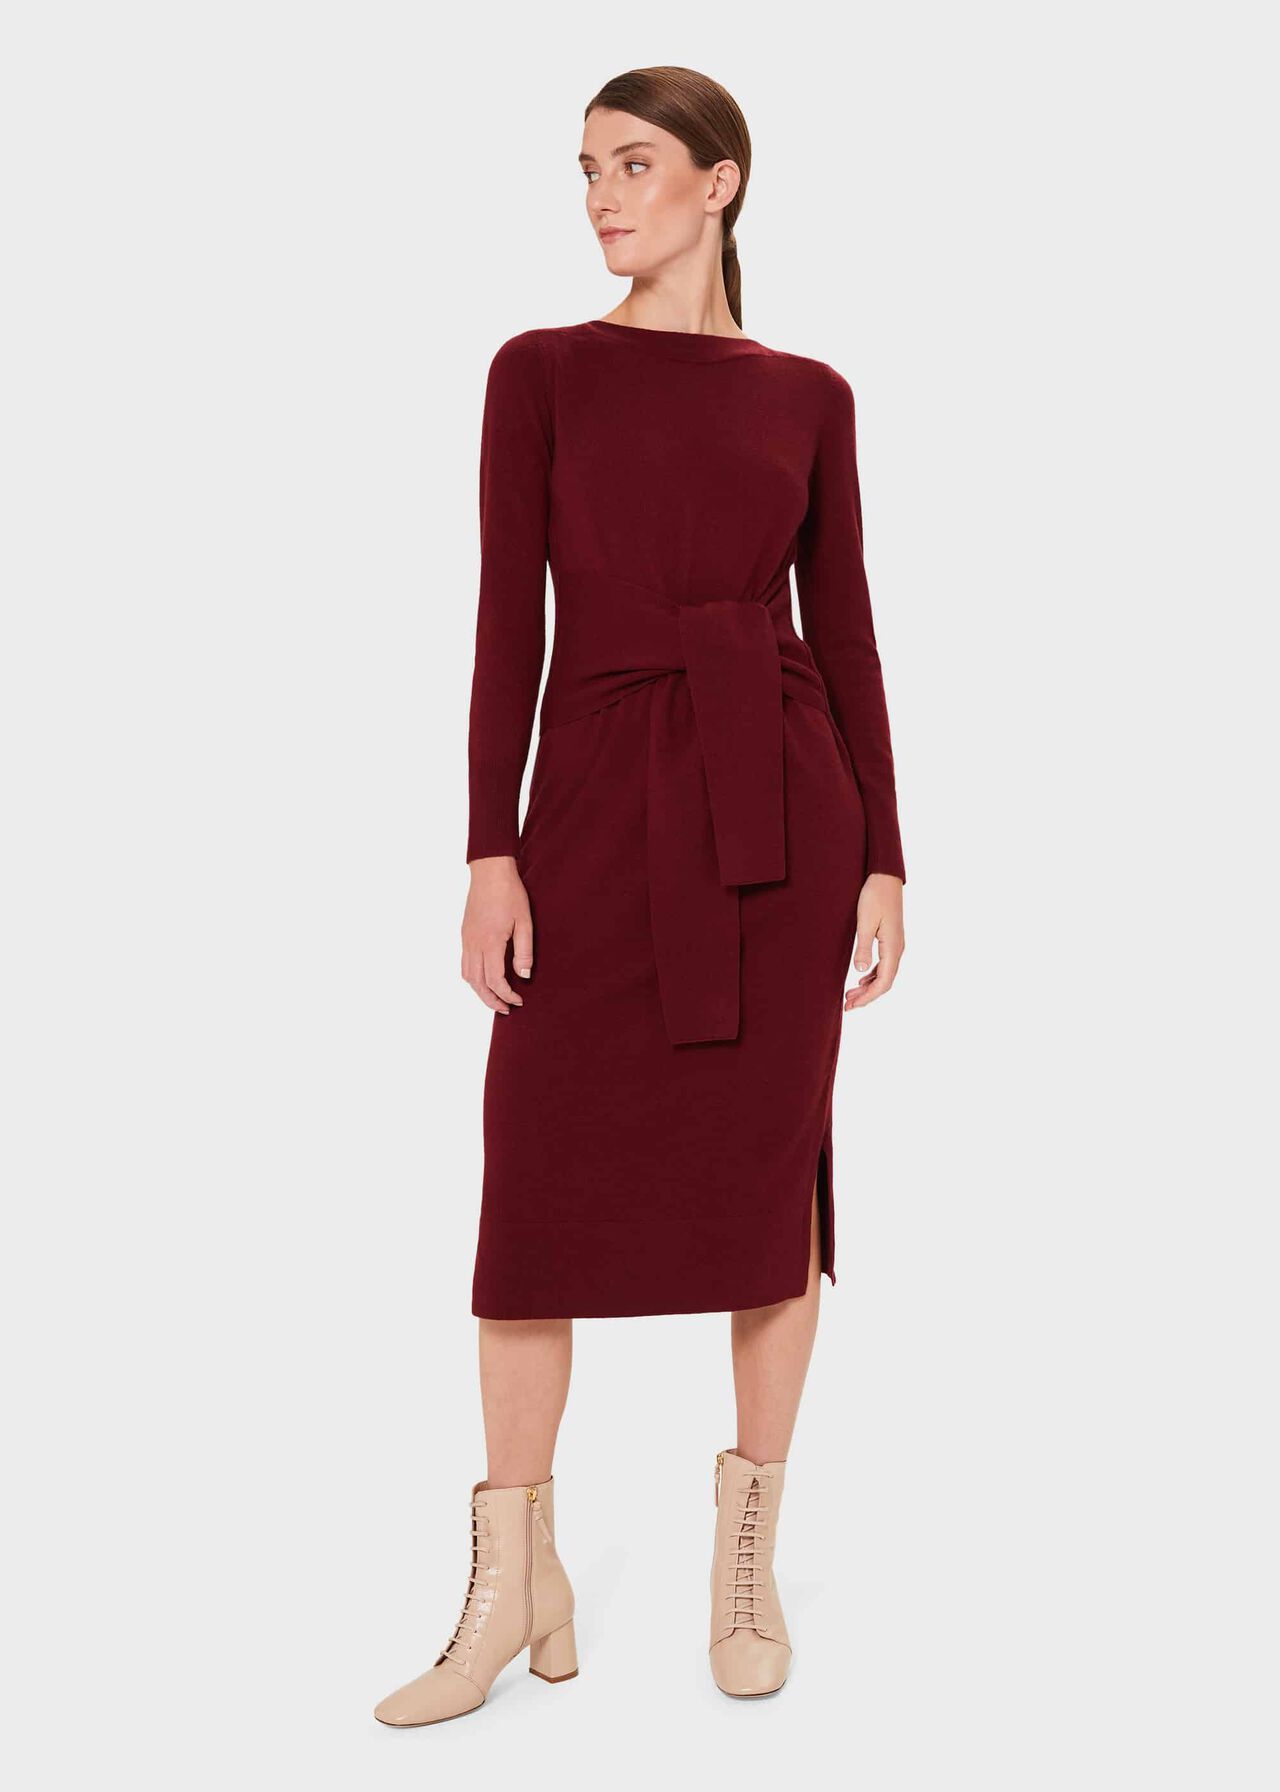 Teagan Knitted Dress With Cashmere, Merlot, hi-res